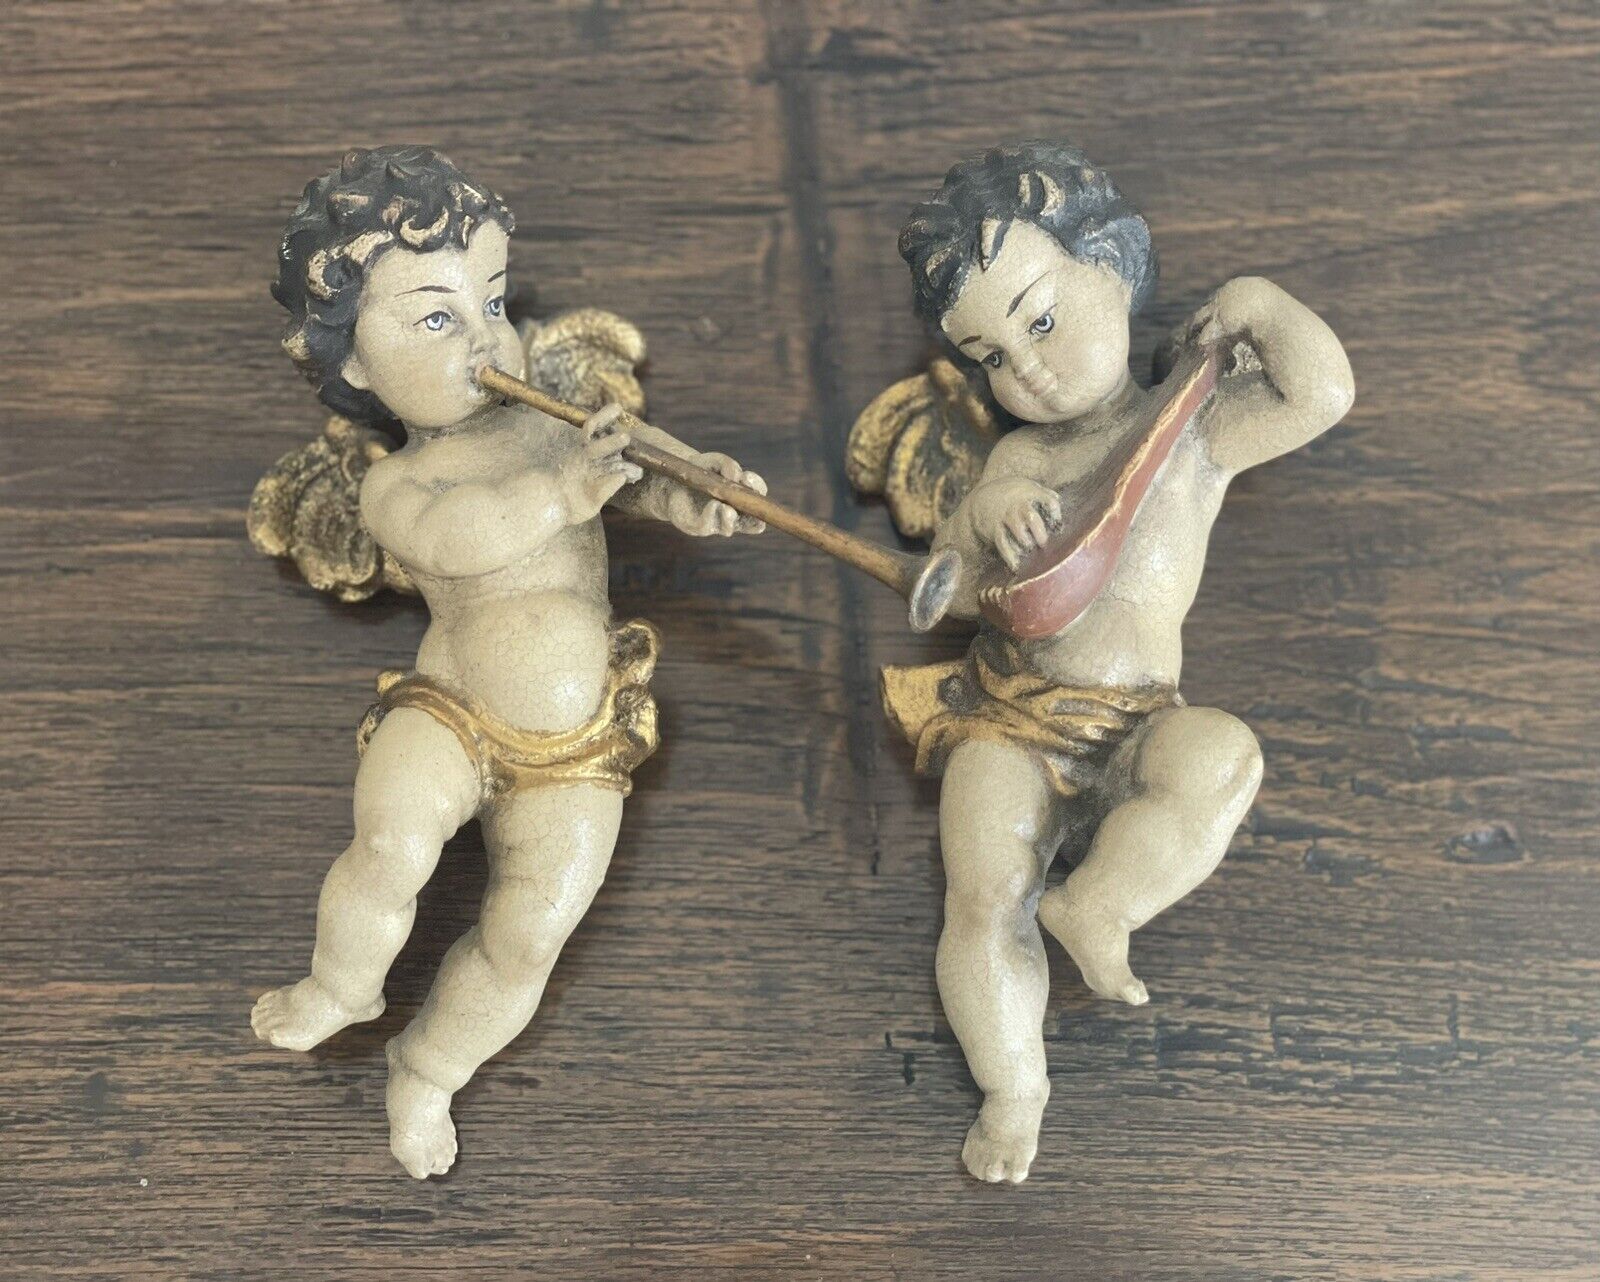 2 Vintage 8” Polychrome Carved Putto Cherubs Wall Hangings Figurines Italy Anri?